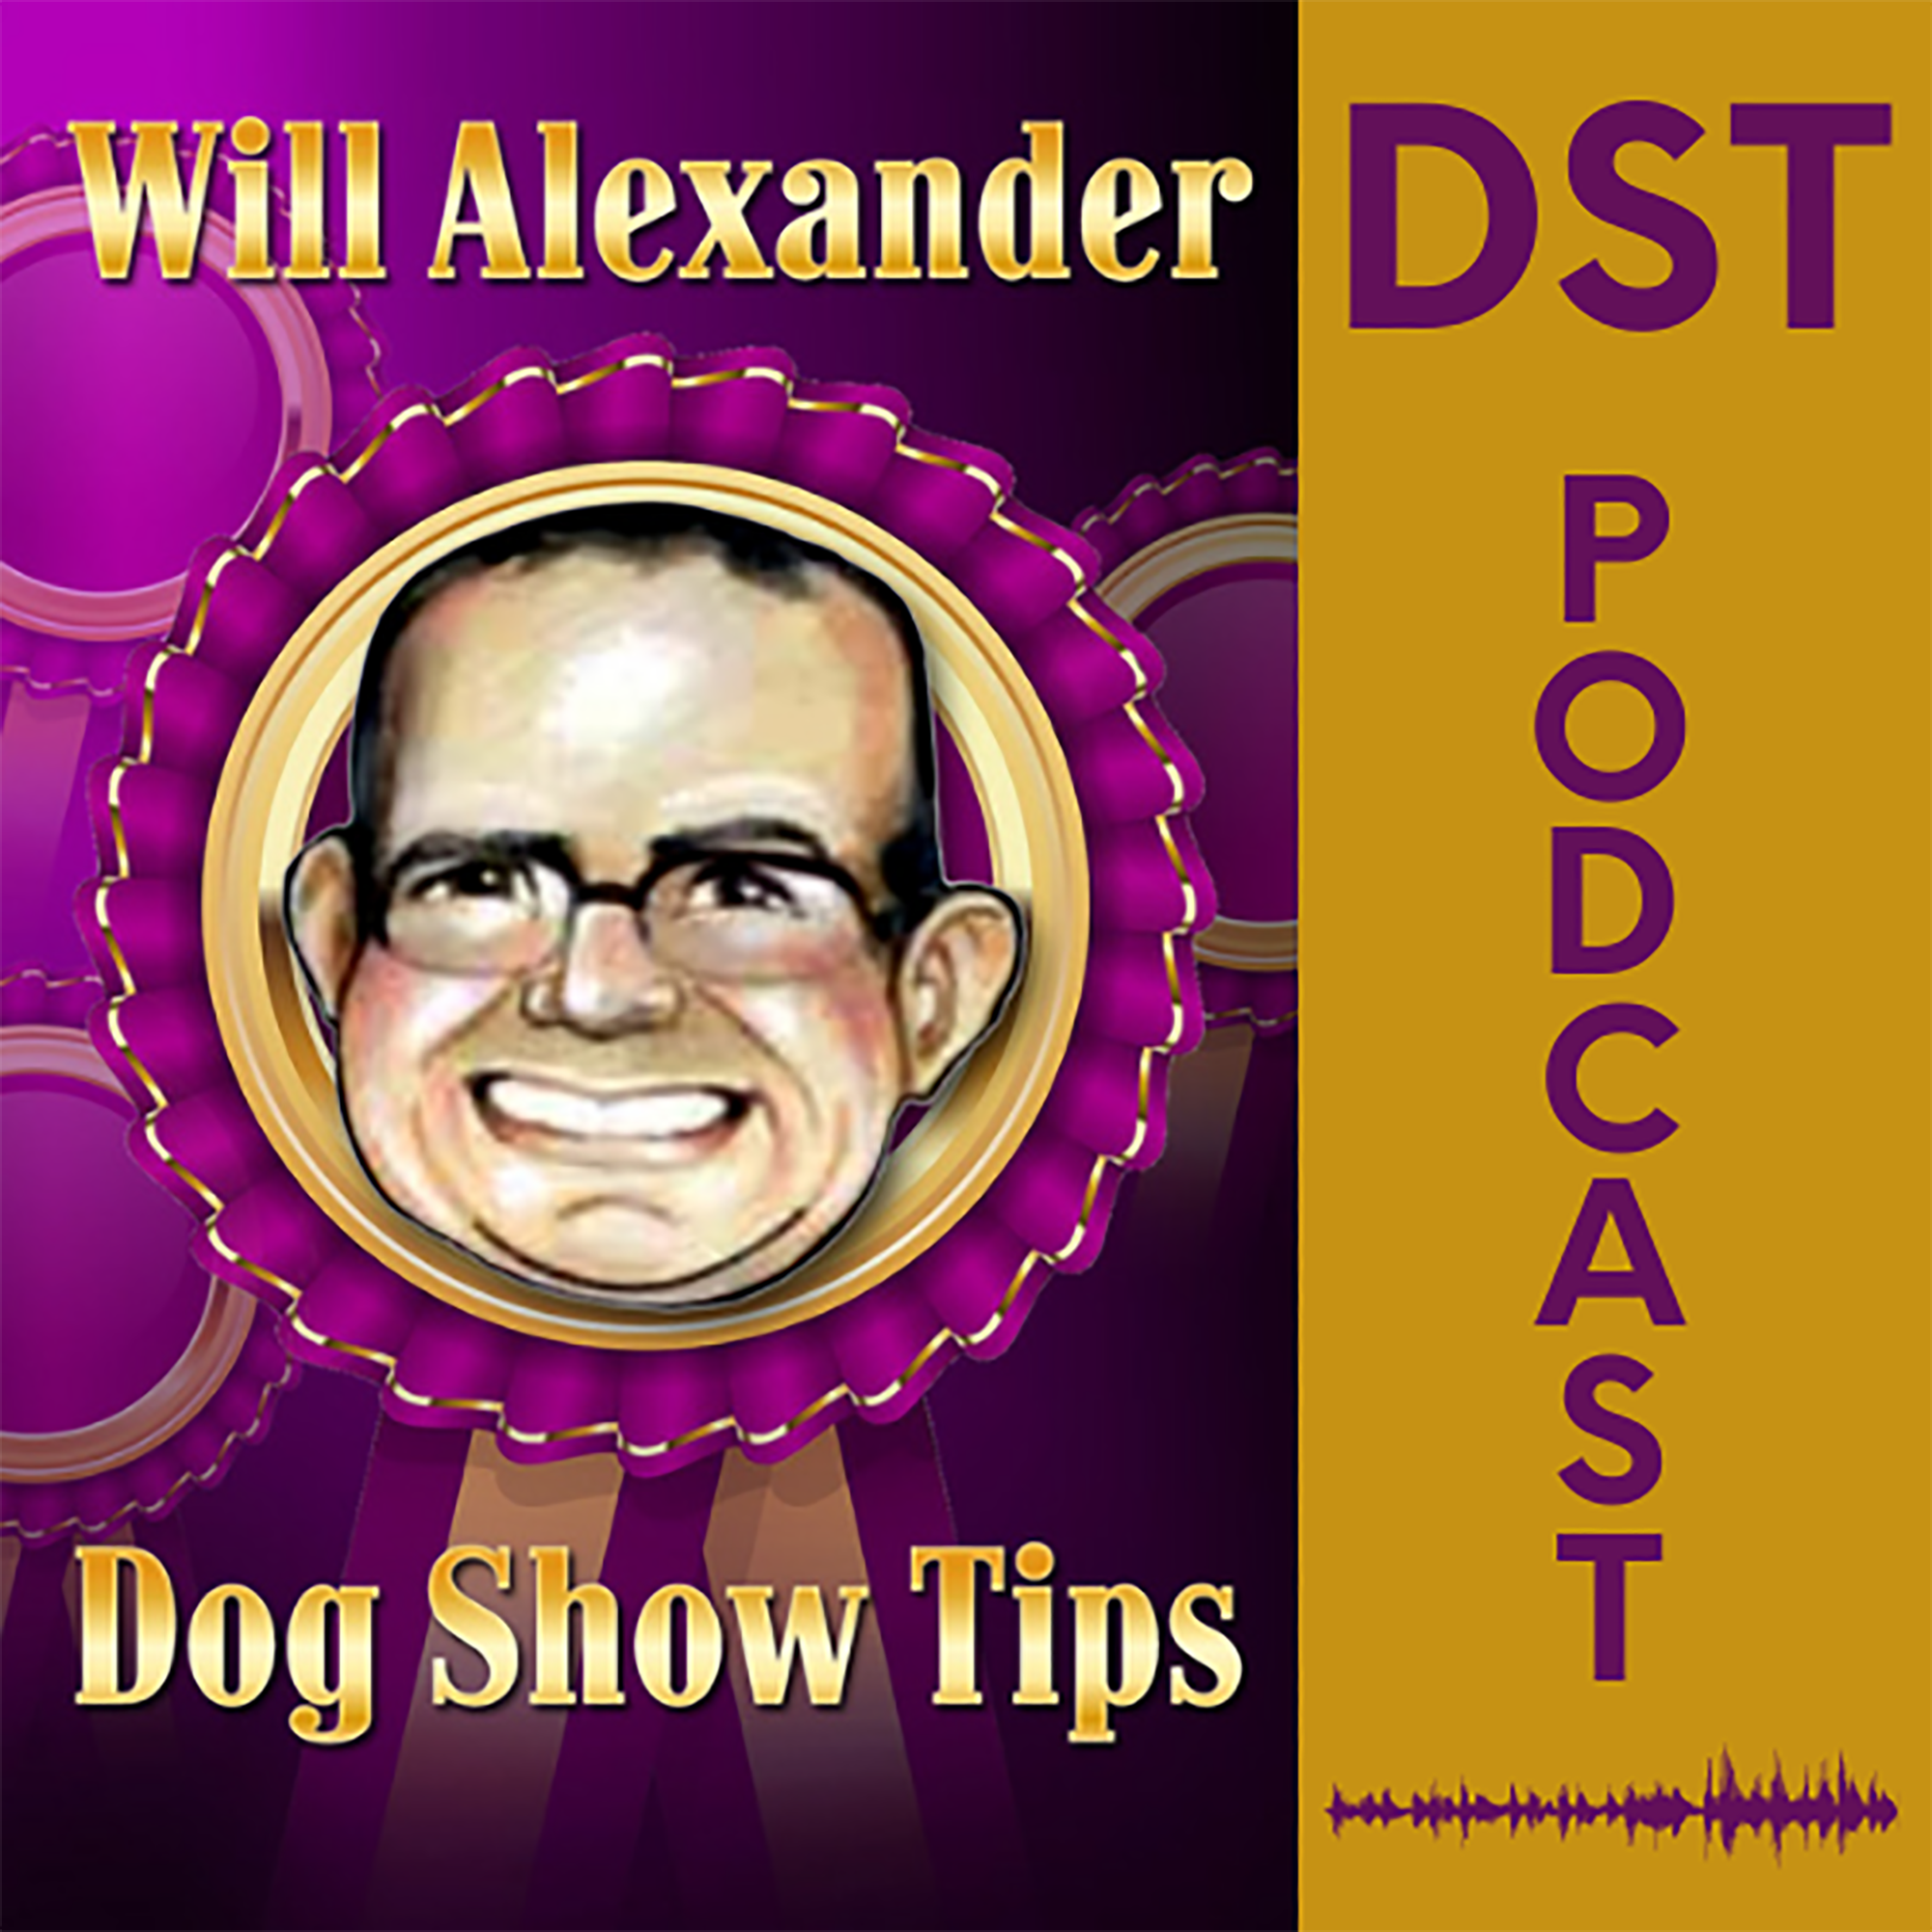 Dog Show Tips - Chris Manelopoulos interviewed by Will Alexander